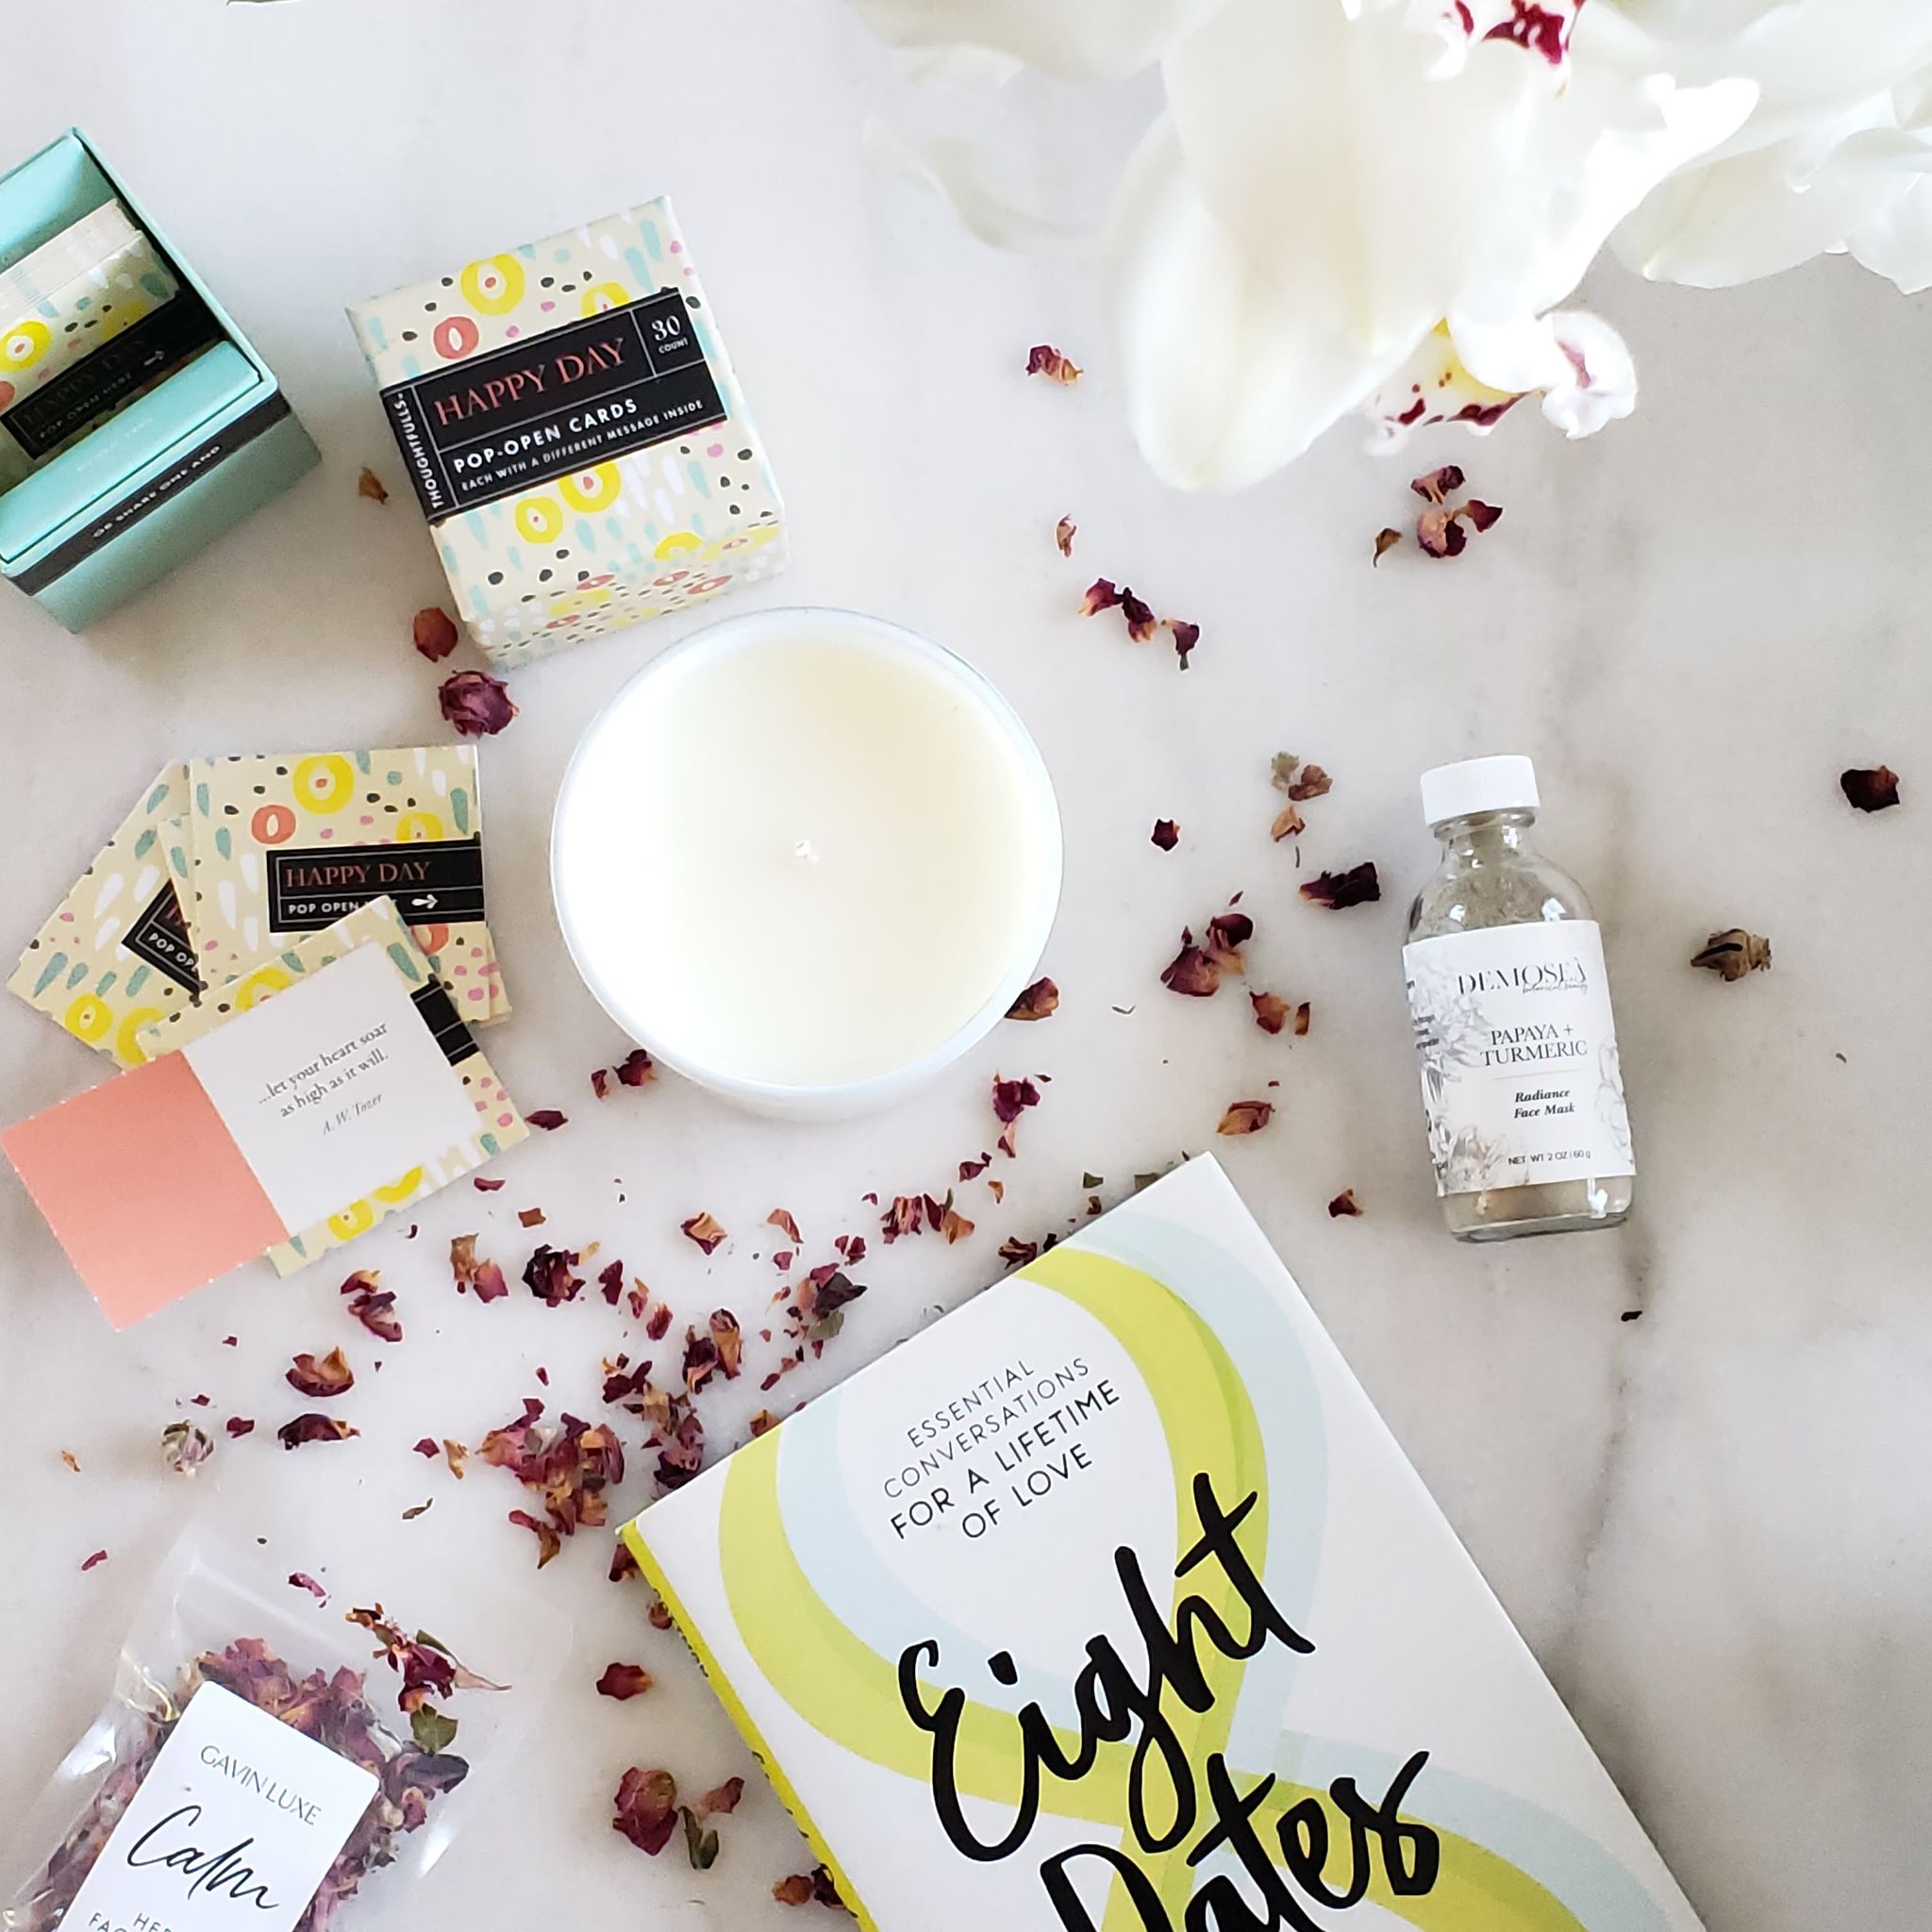 Self-Care Sunday 003. Here's what I'm loving this week